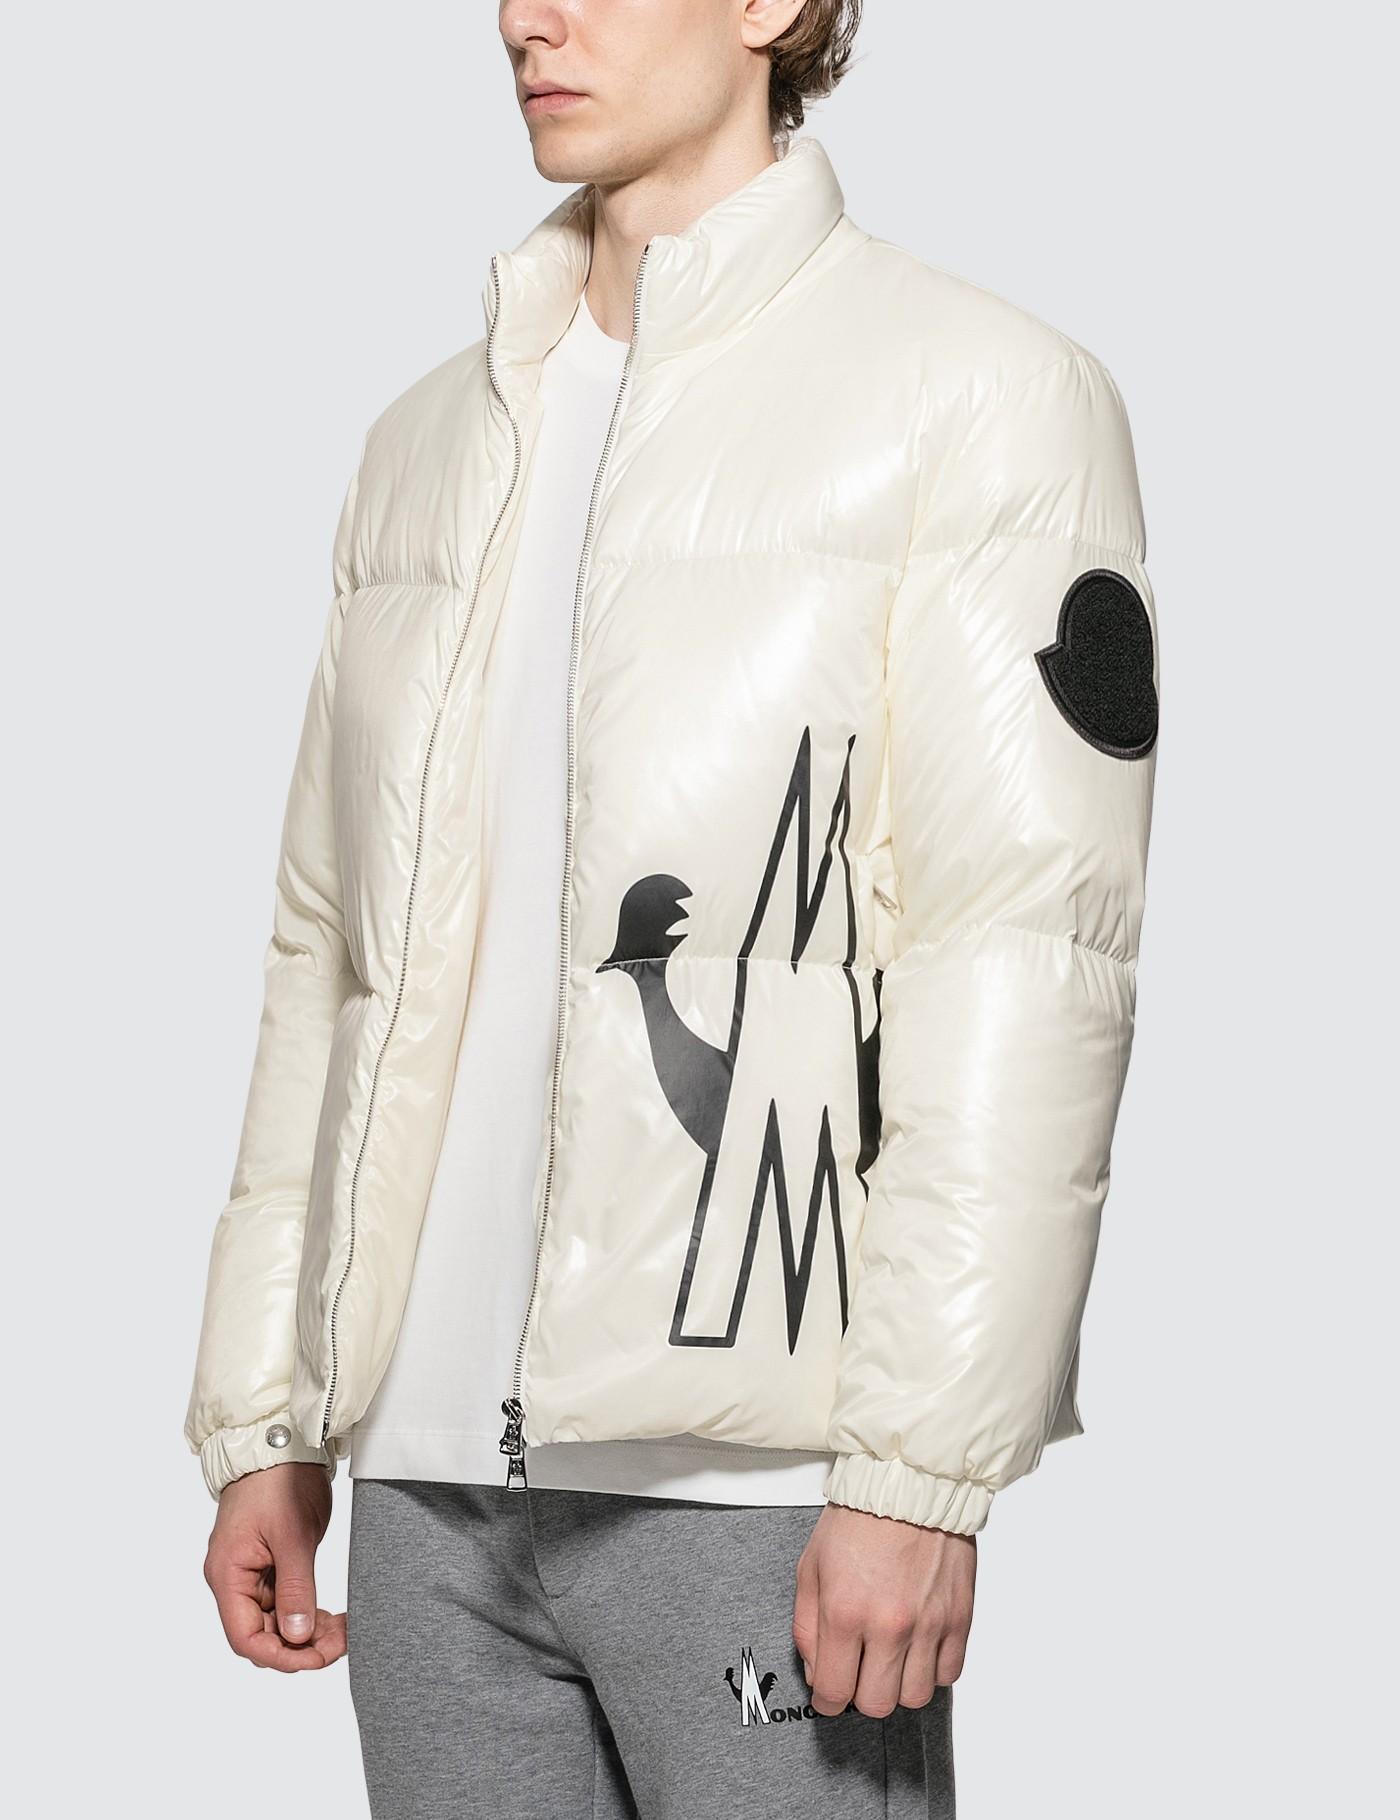 Moncler Synthetic Nylon Down Jacket With Front Logo in White for Men - Lyst